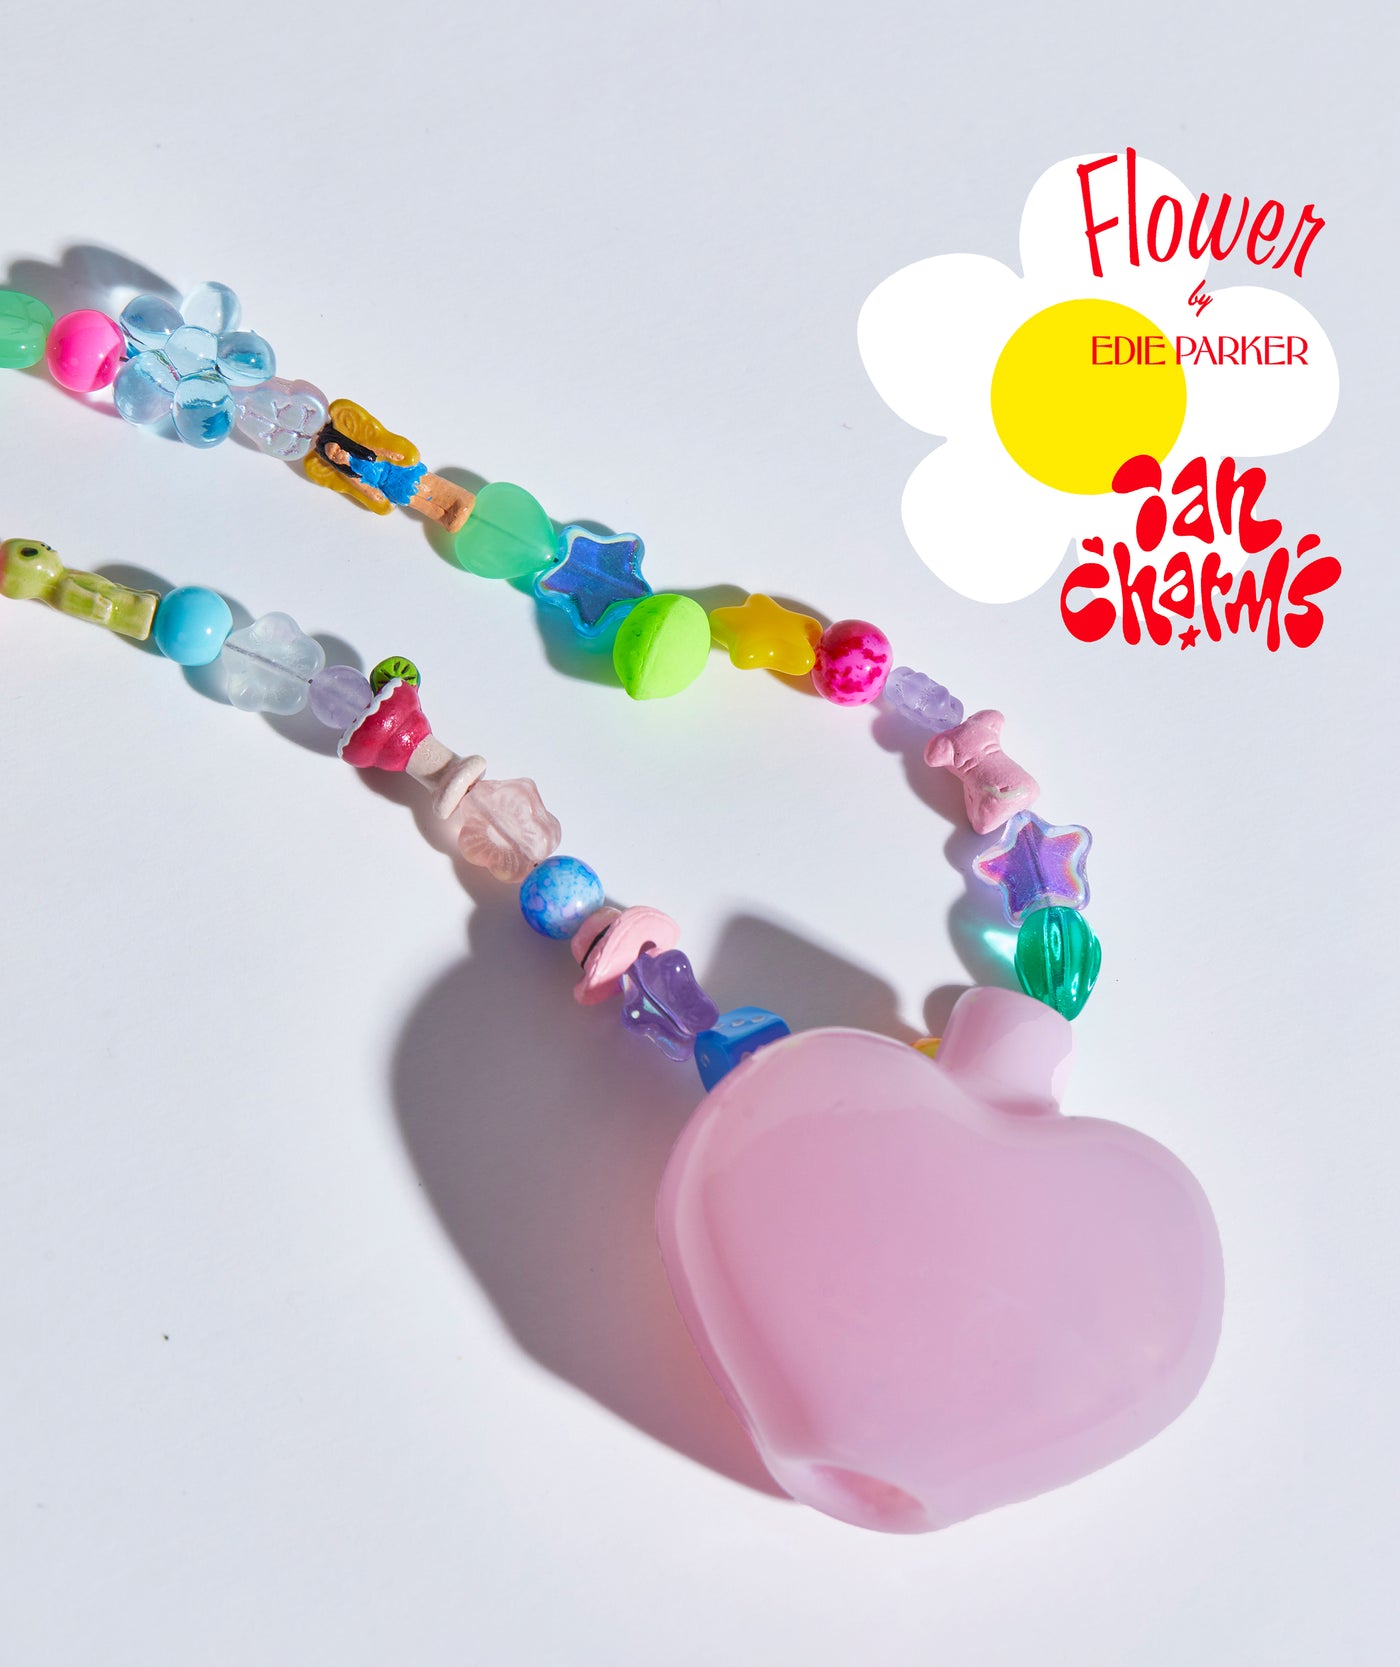 Ian Charms x Edie Parker Flower Heart One-hitter Necklace (green)